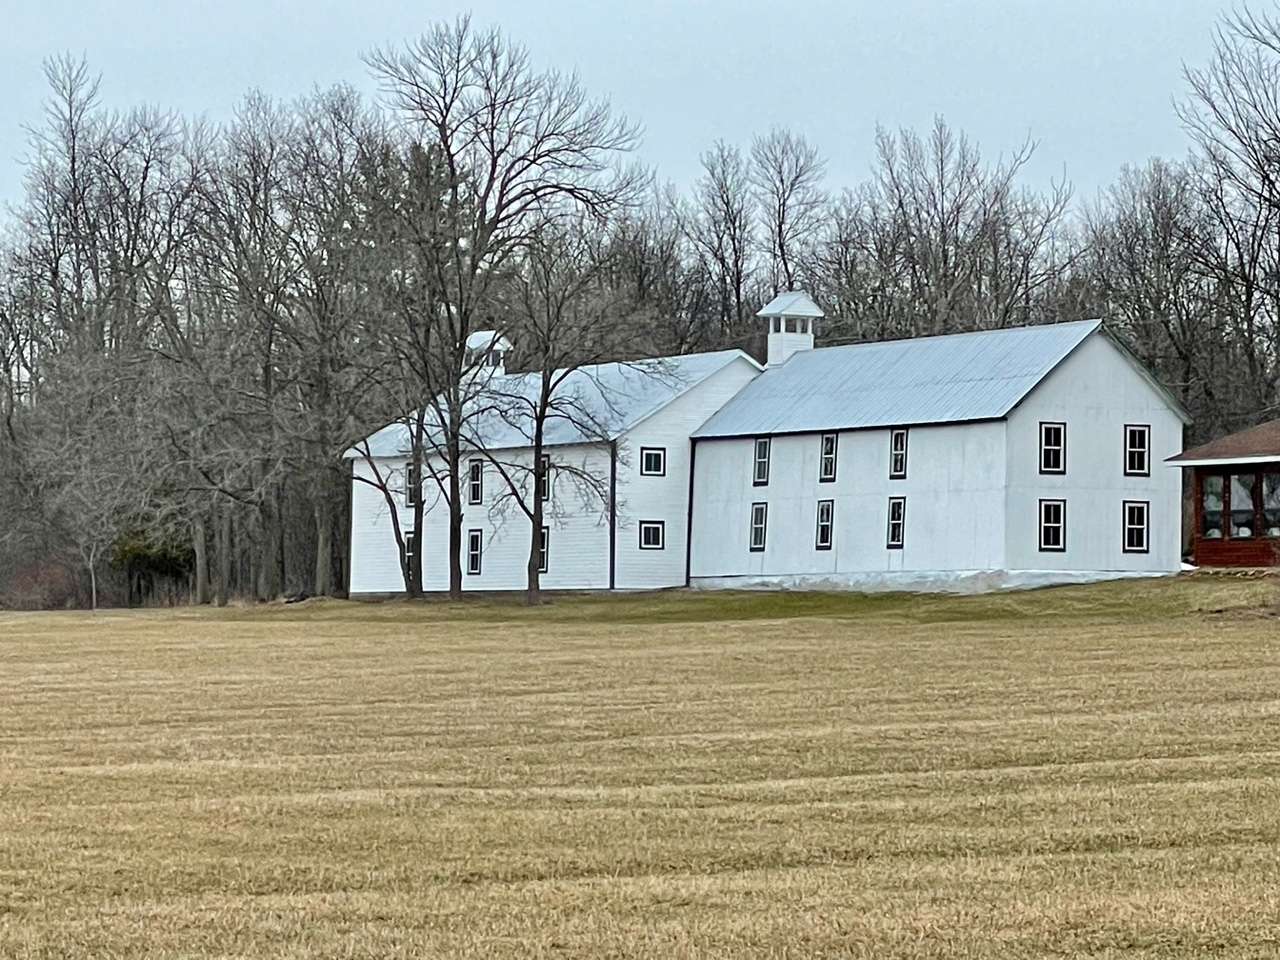 Large white barn on the ancient oak trail